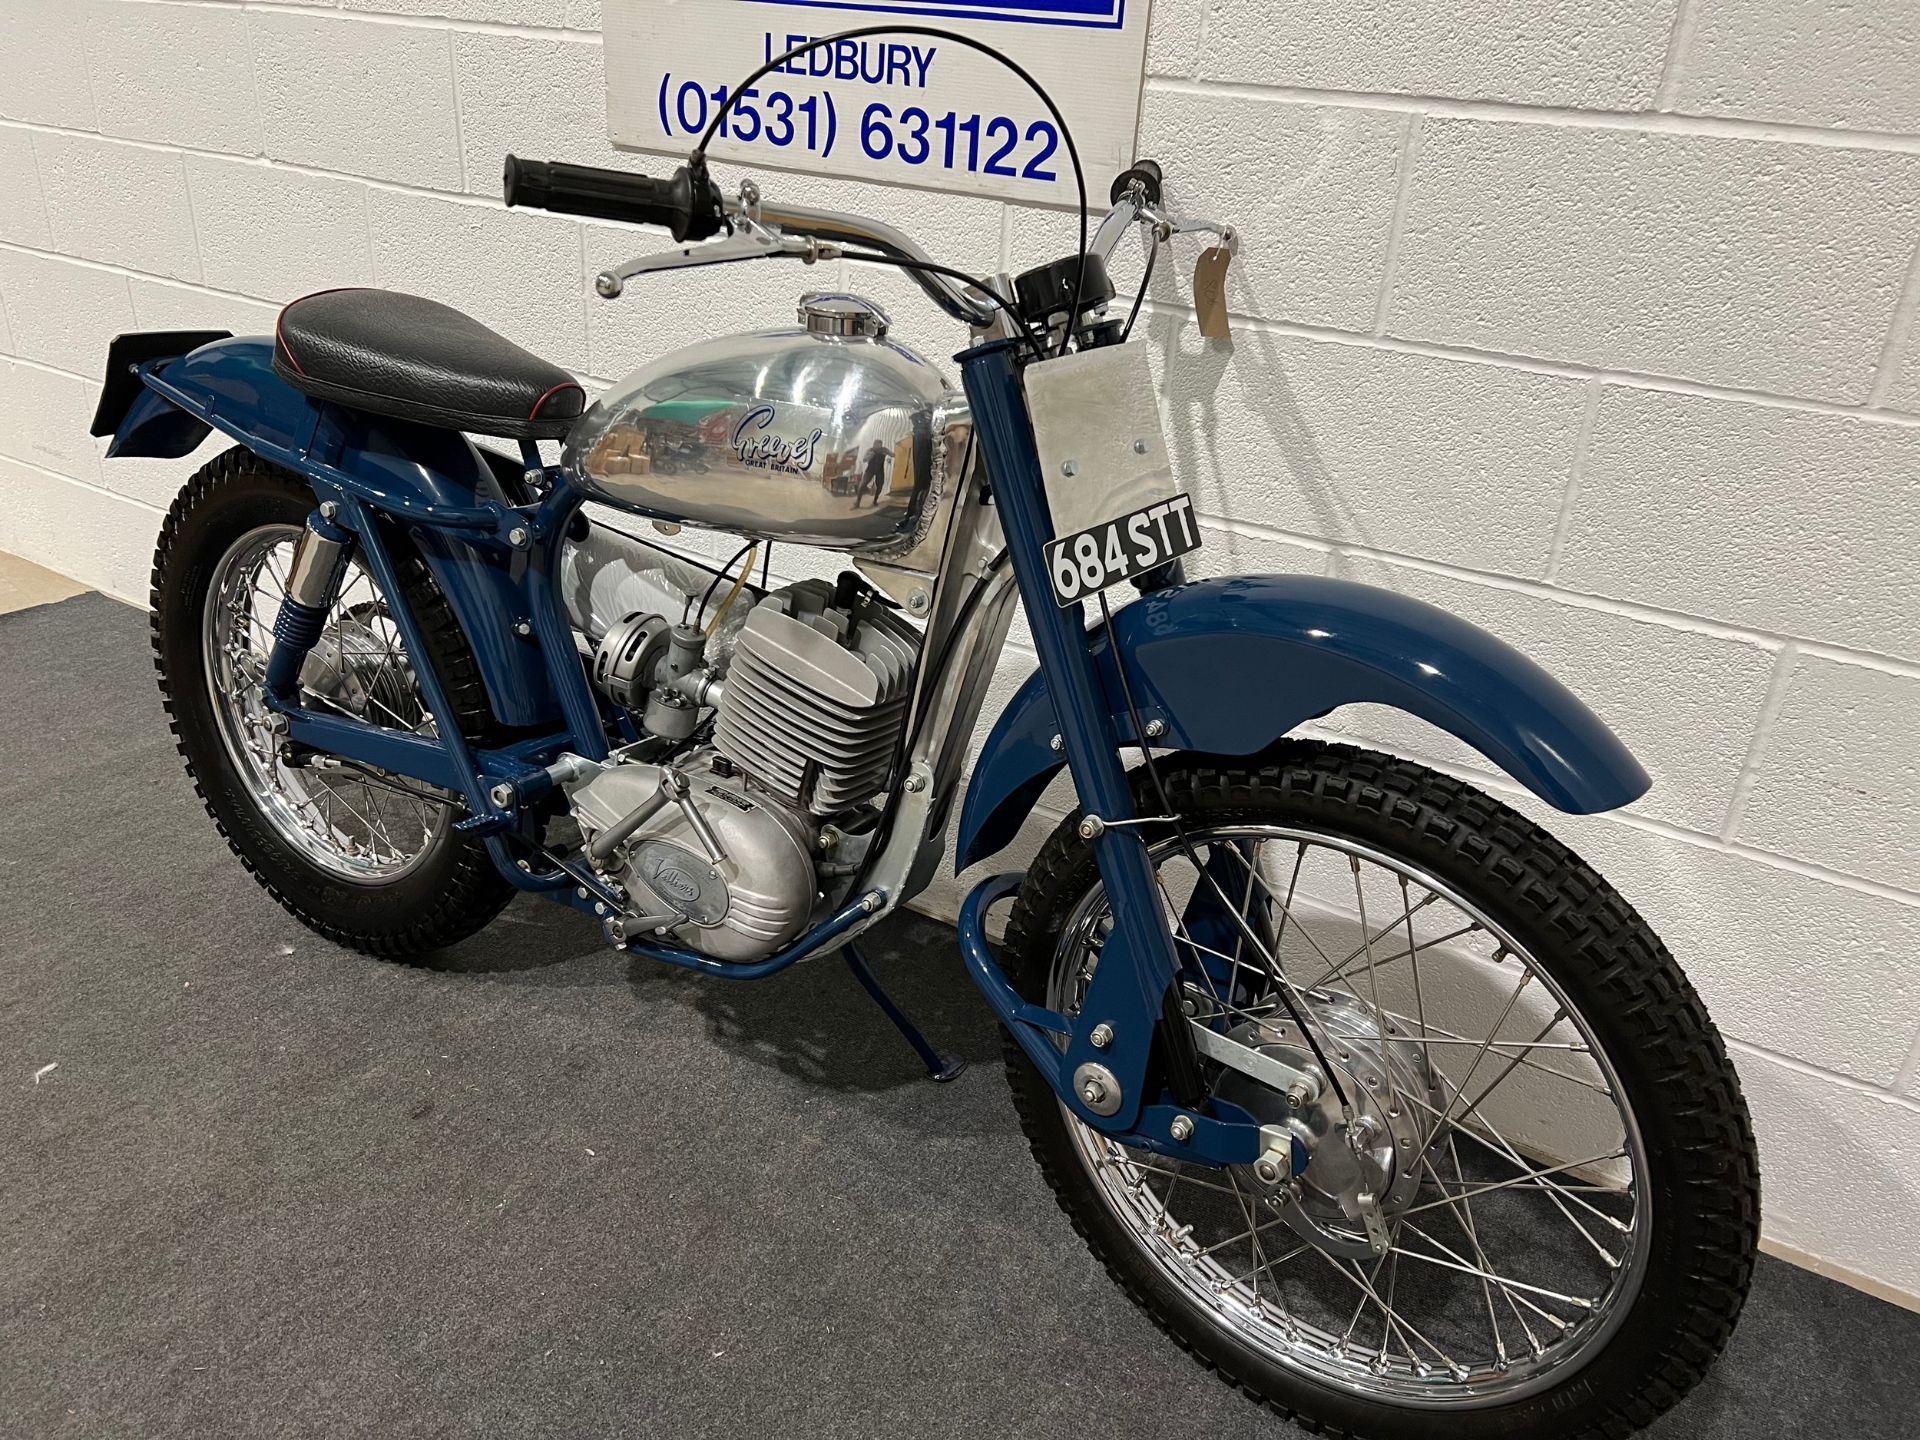 Greeves 24 TES trials motorcycle. 1963. 248cc. Frame no. 24TES307 Engine no. 32A/4520L/2707 Owned